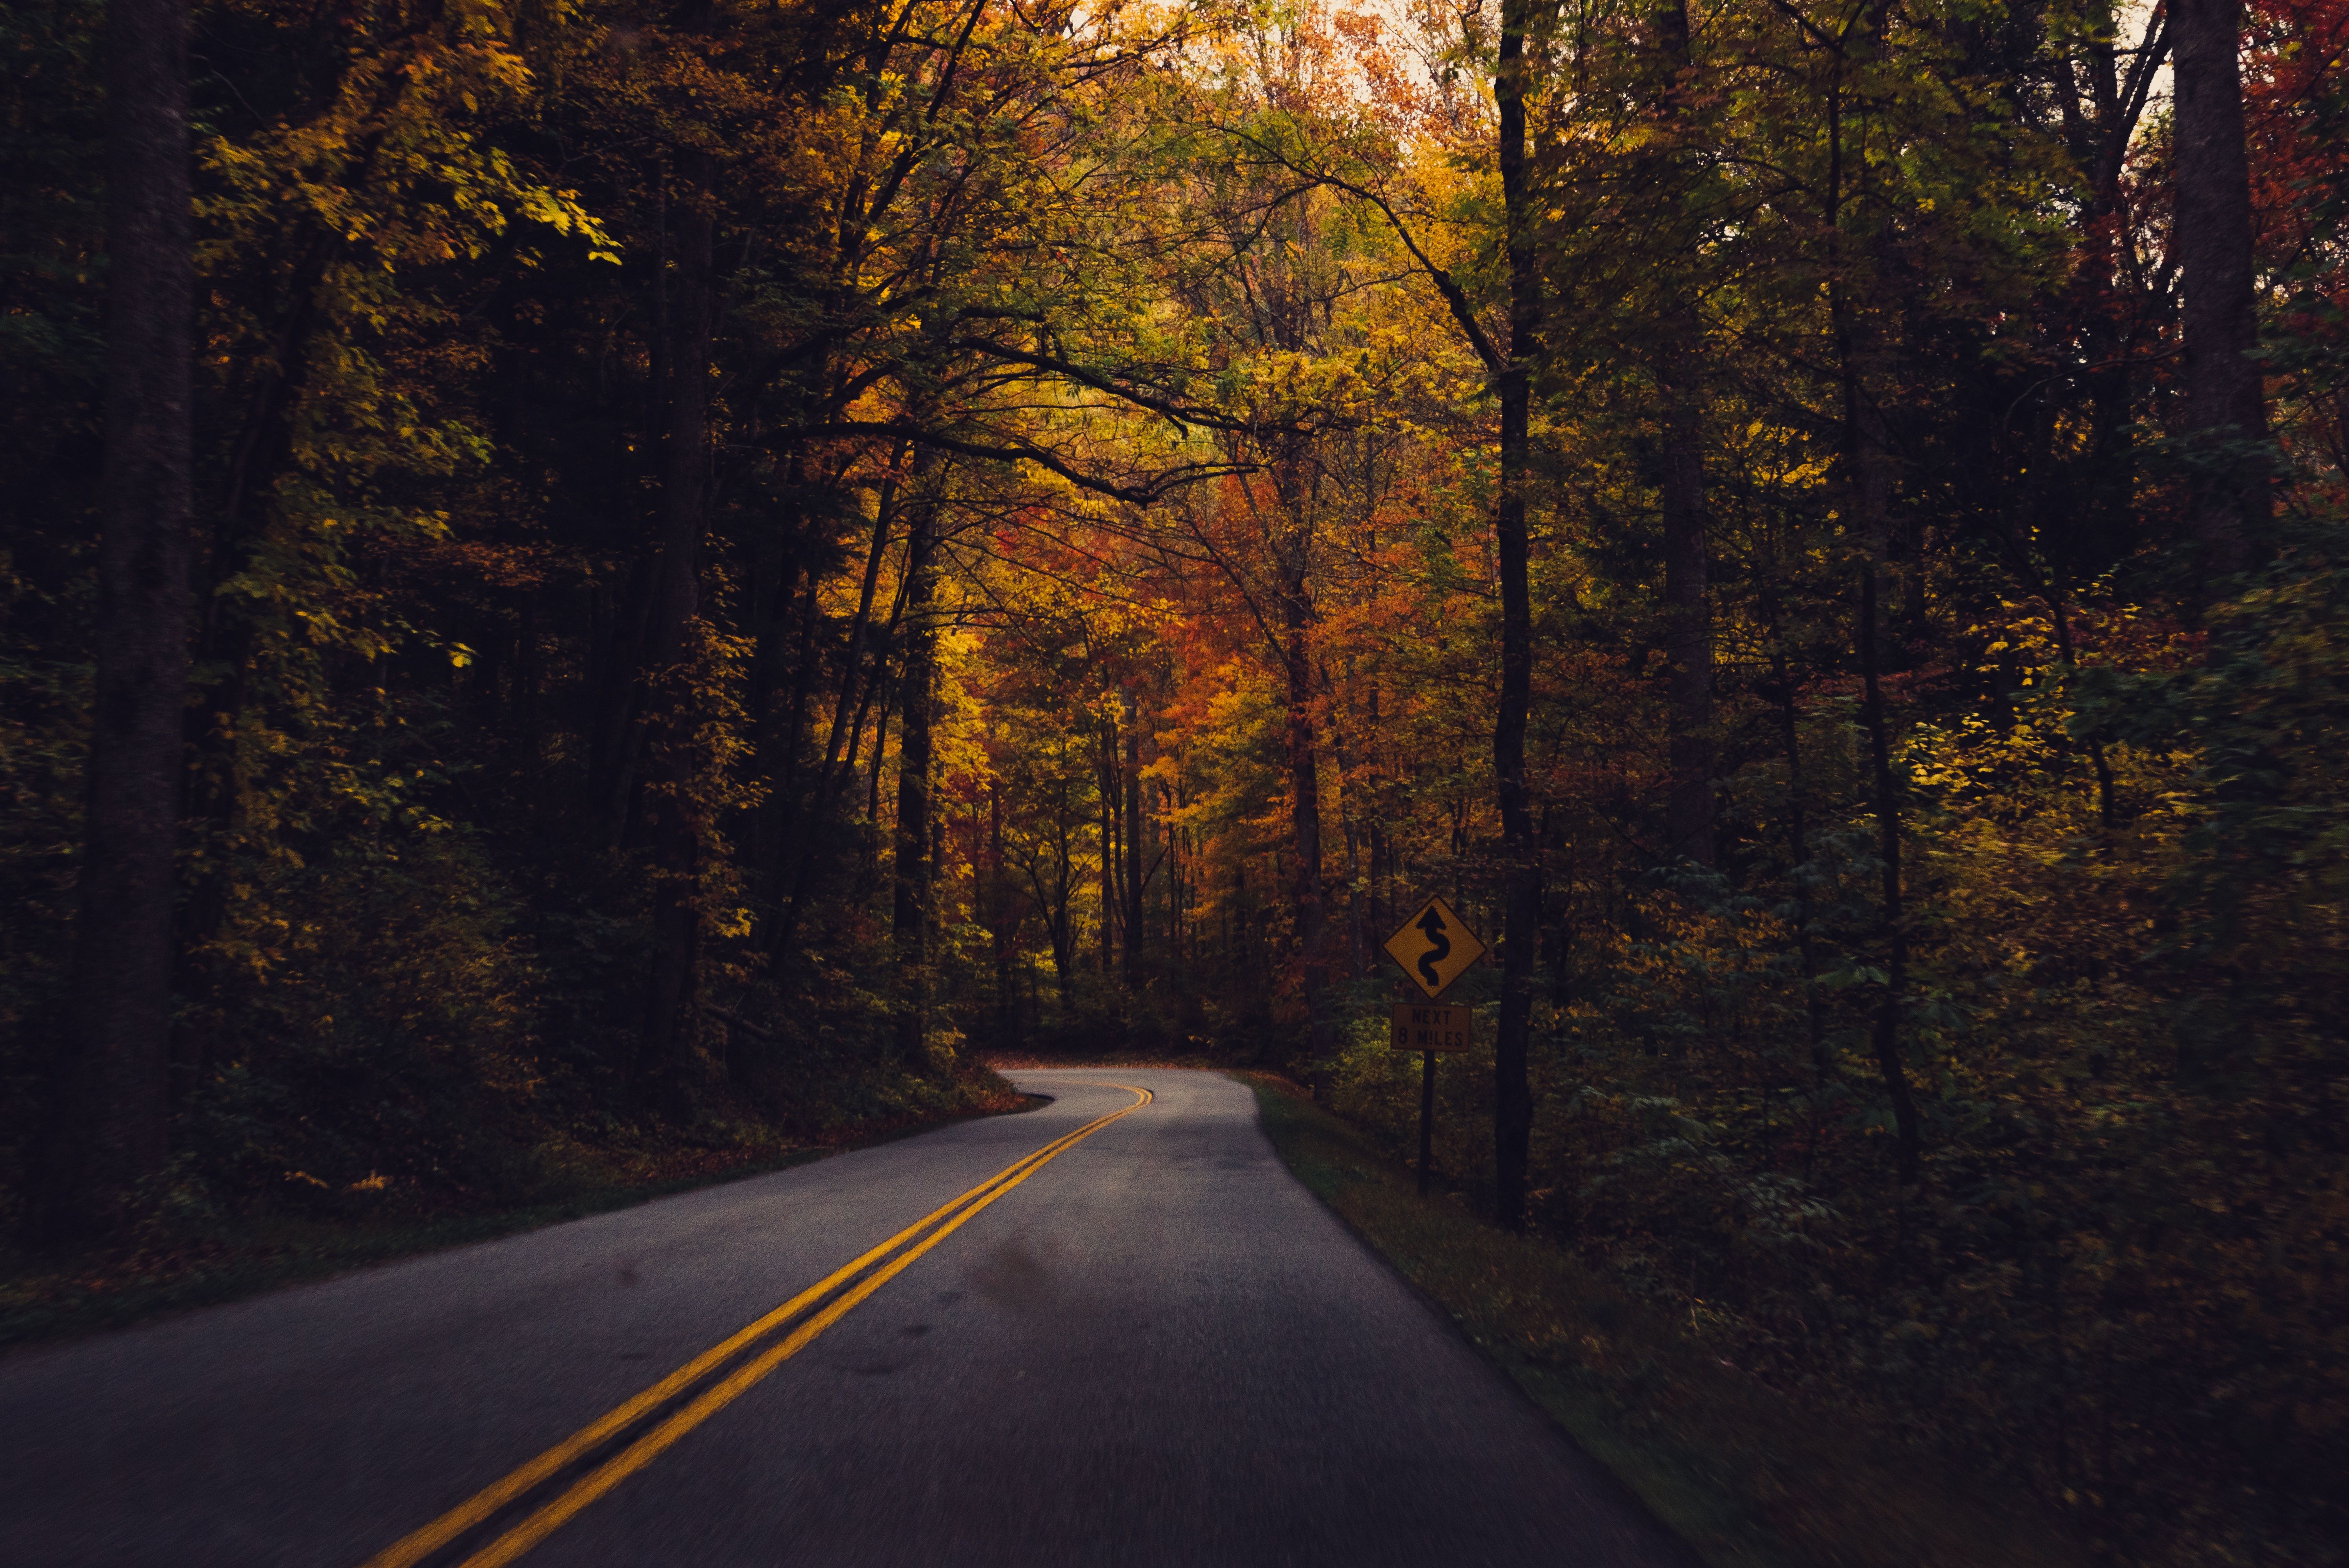 5871x3919 #green, #road line, #yellow, #autumn, #road, #wind, #turn, #street, #curve, #mountain road, #windy road, #tarmac, #wallpaper, #fall, #forest, #fall vibe, #mountainside, #highway, #Free picture, #wood, #tree. Mocah.org HD Desktop